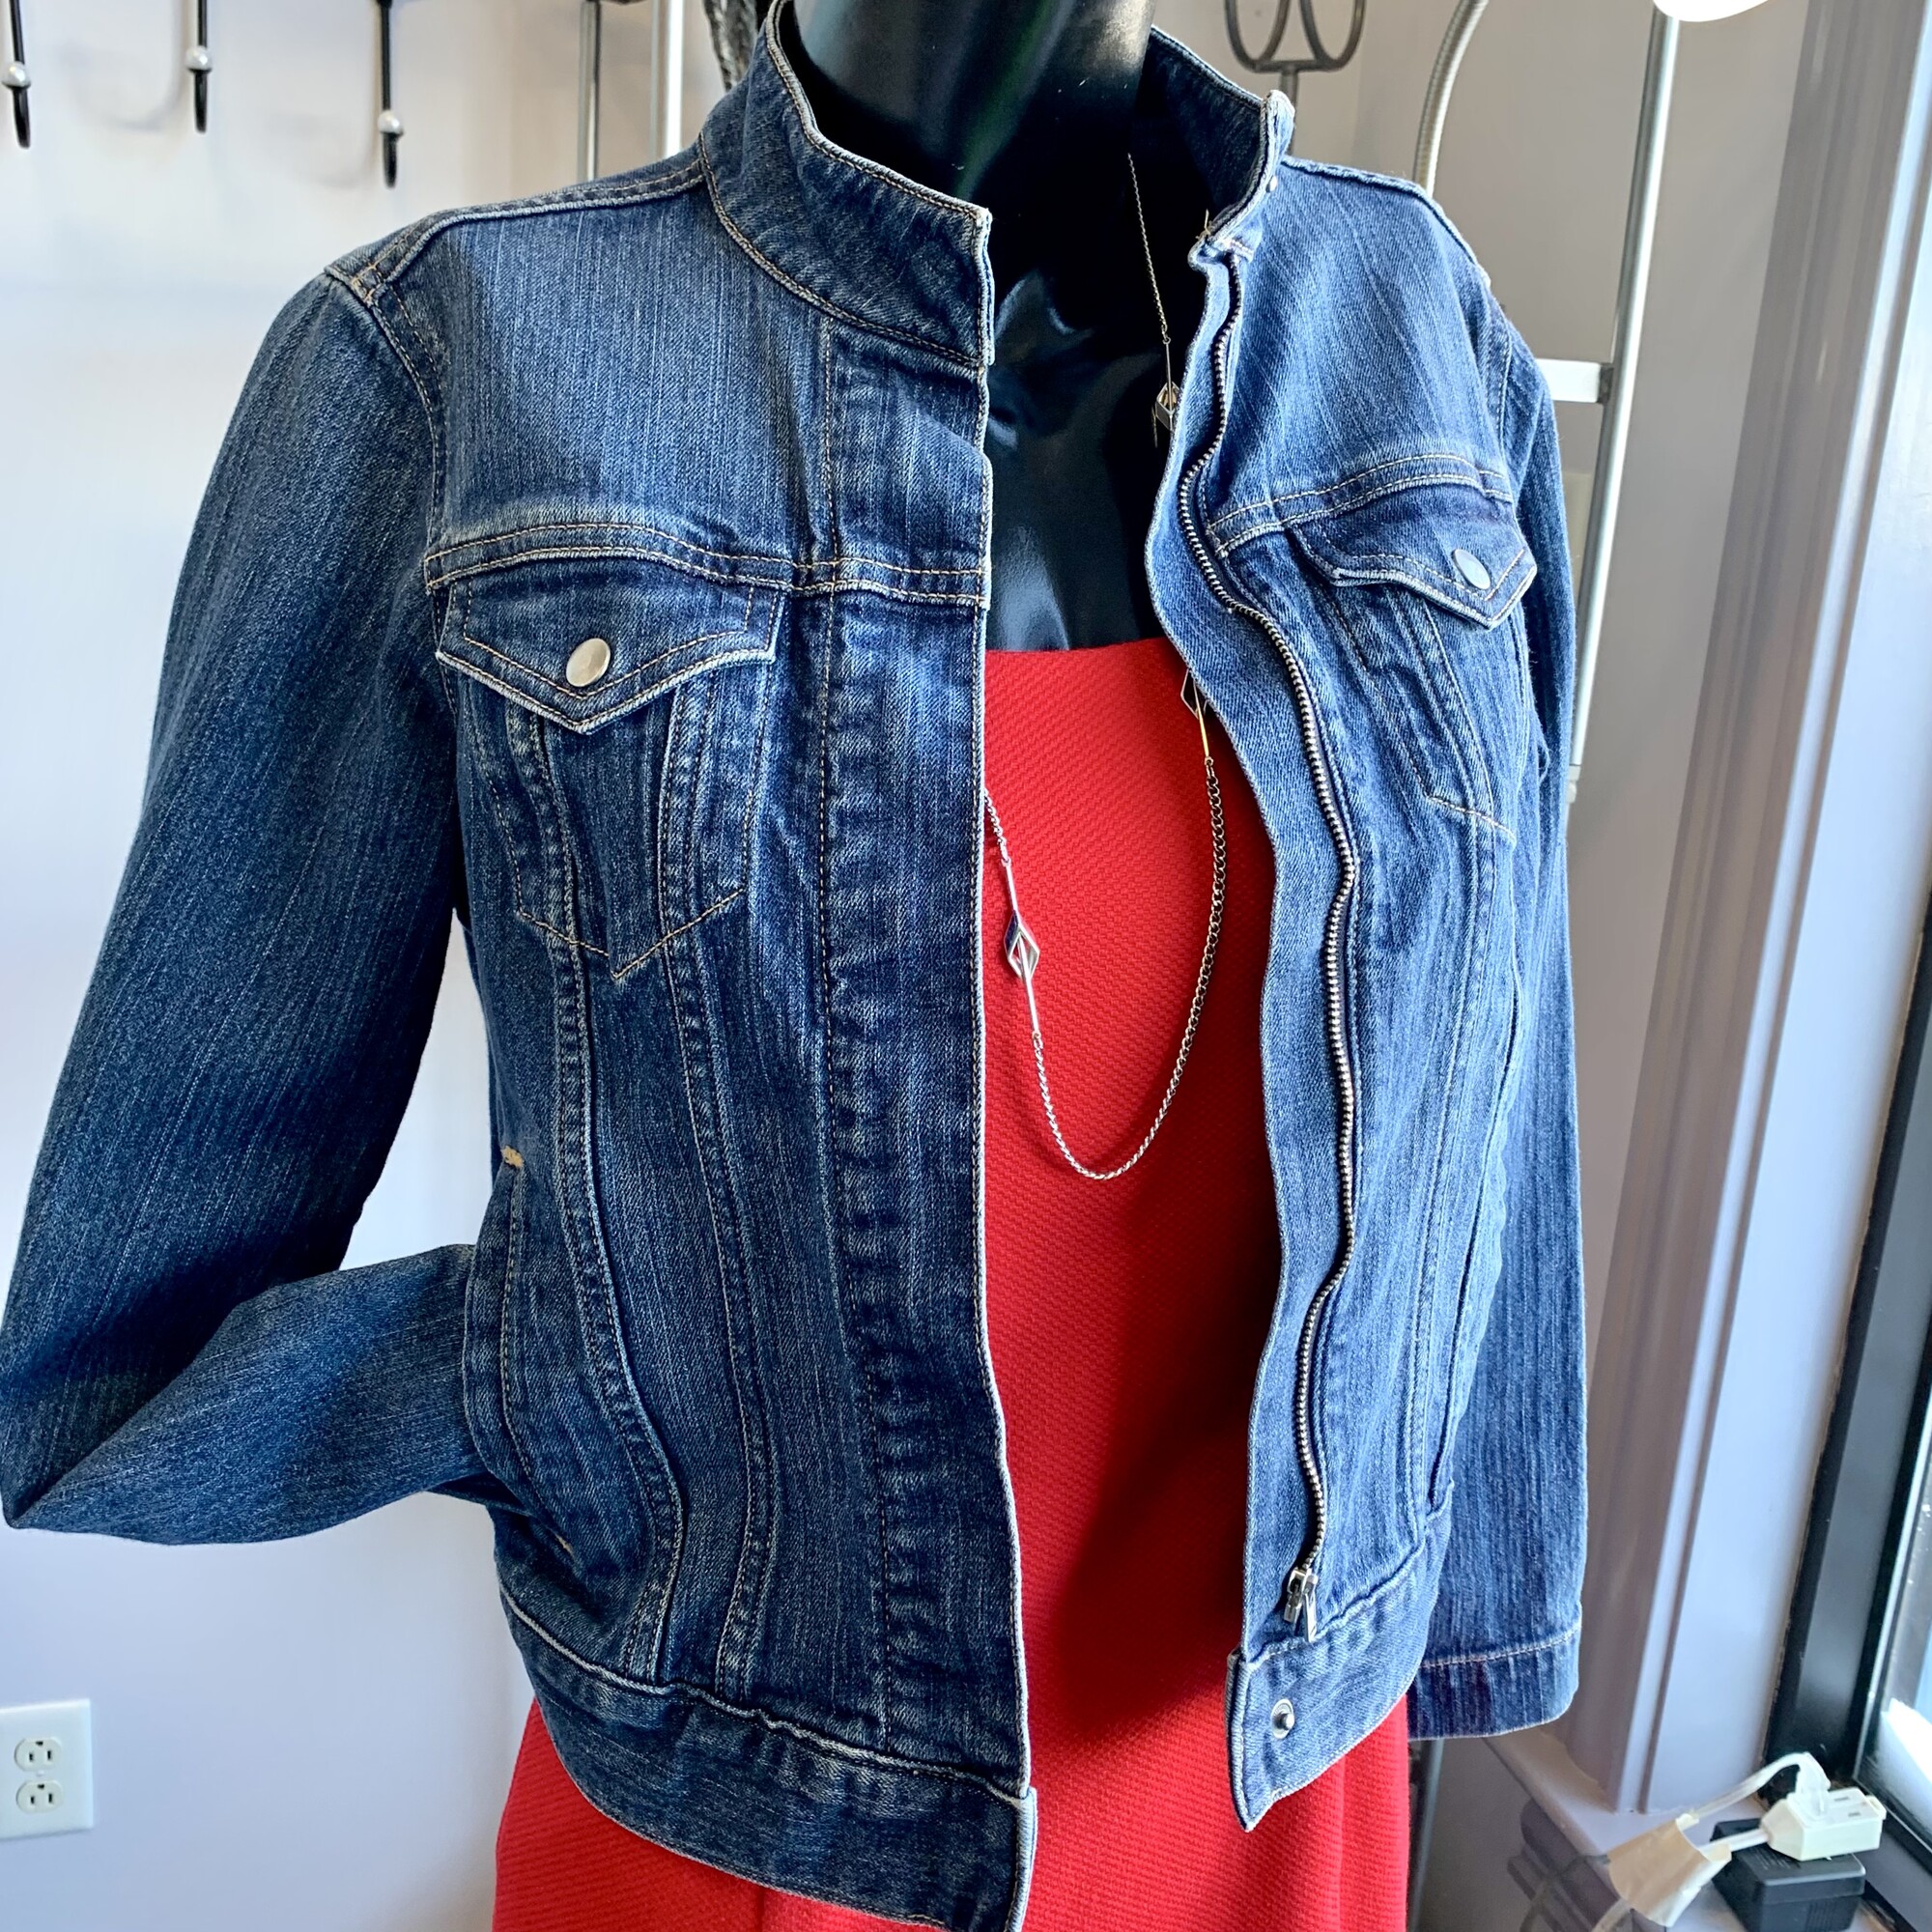 Banana R Jacket Denim,
Colour:  Blue,
Size: Small,
With zipper detail in the sleeve,